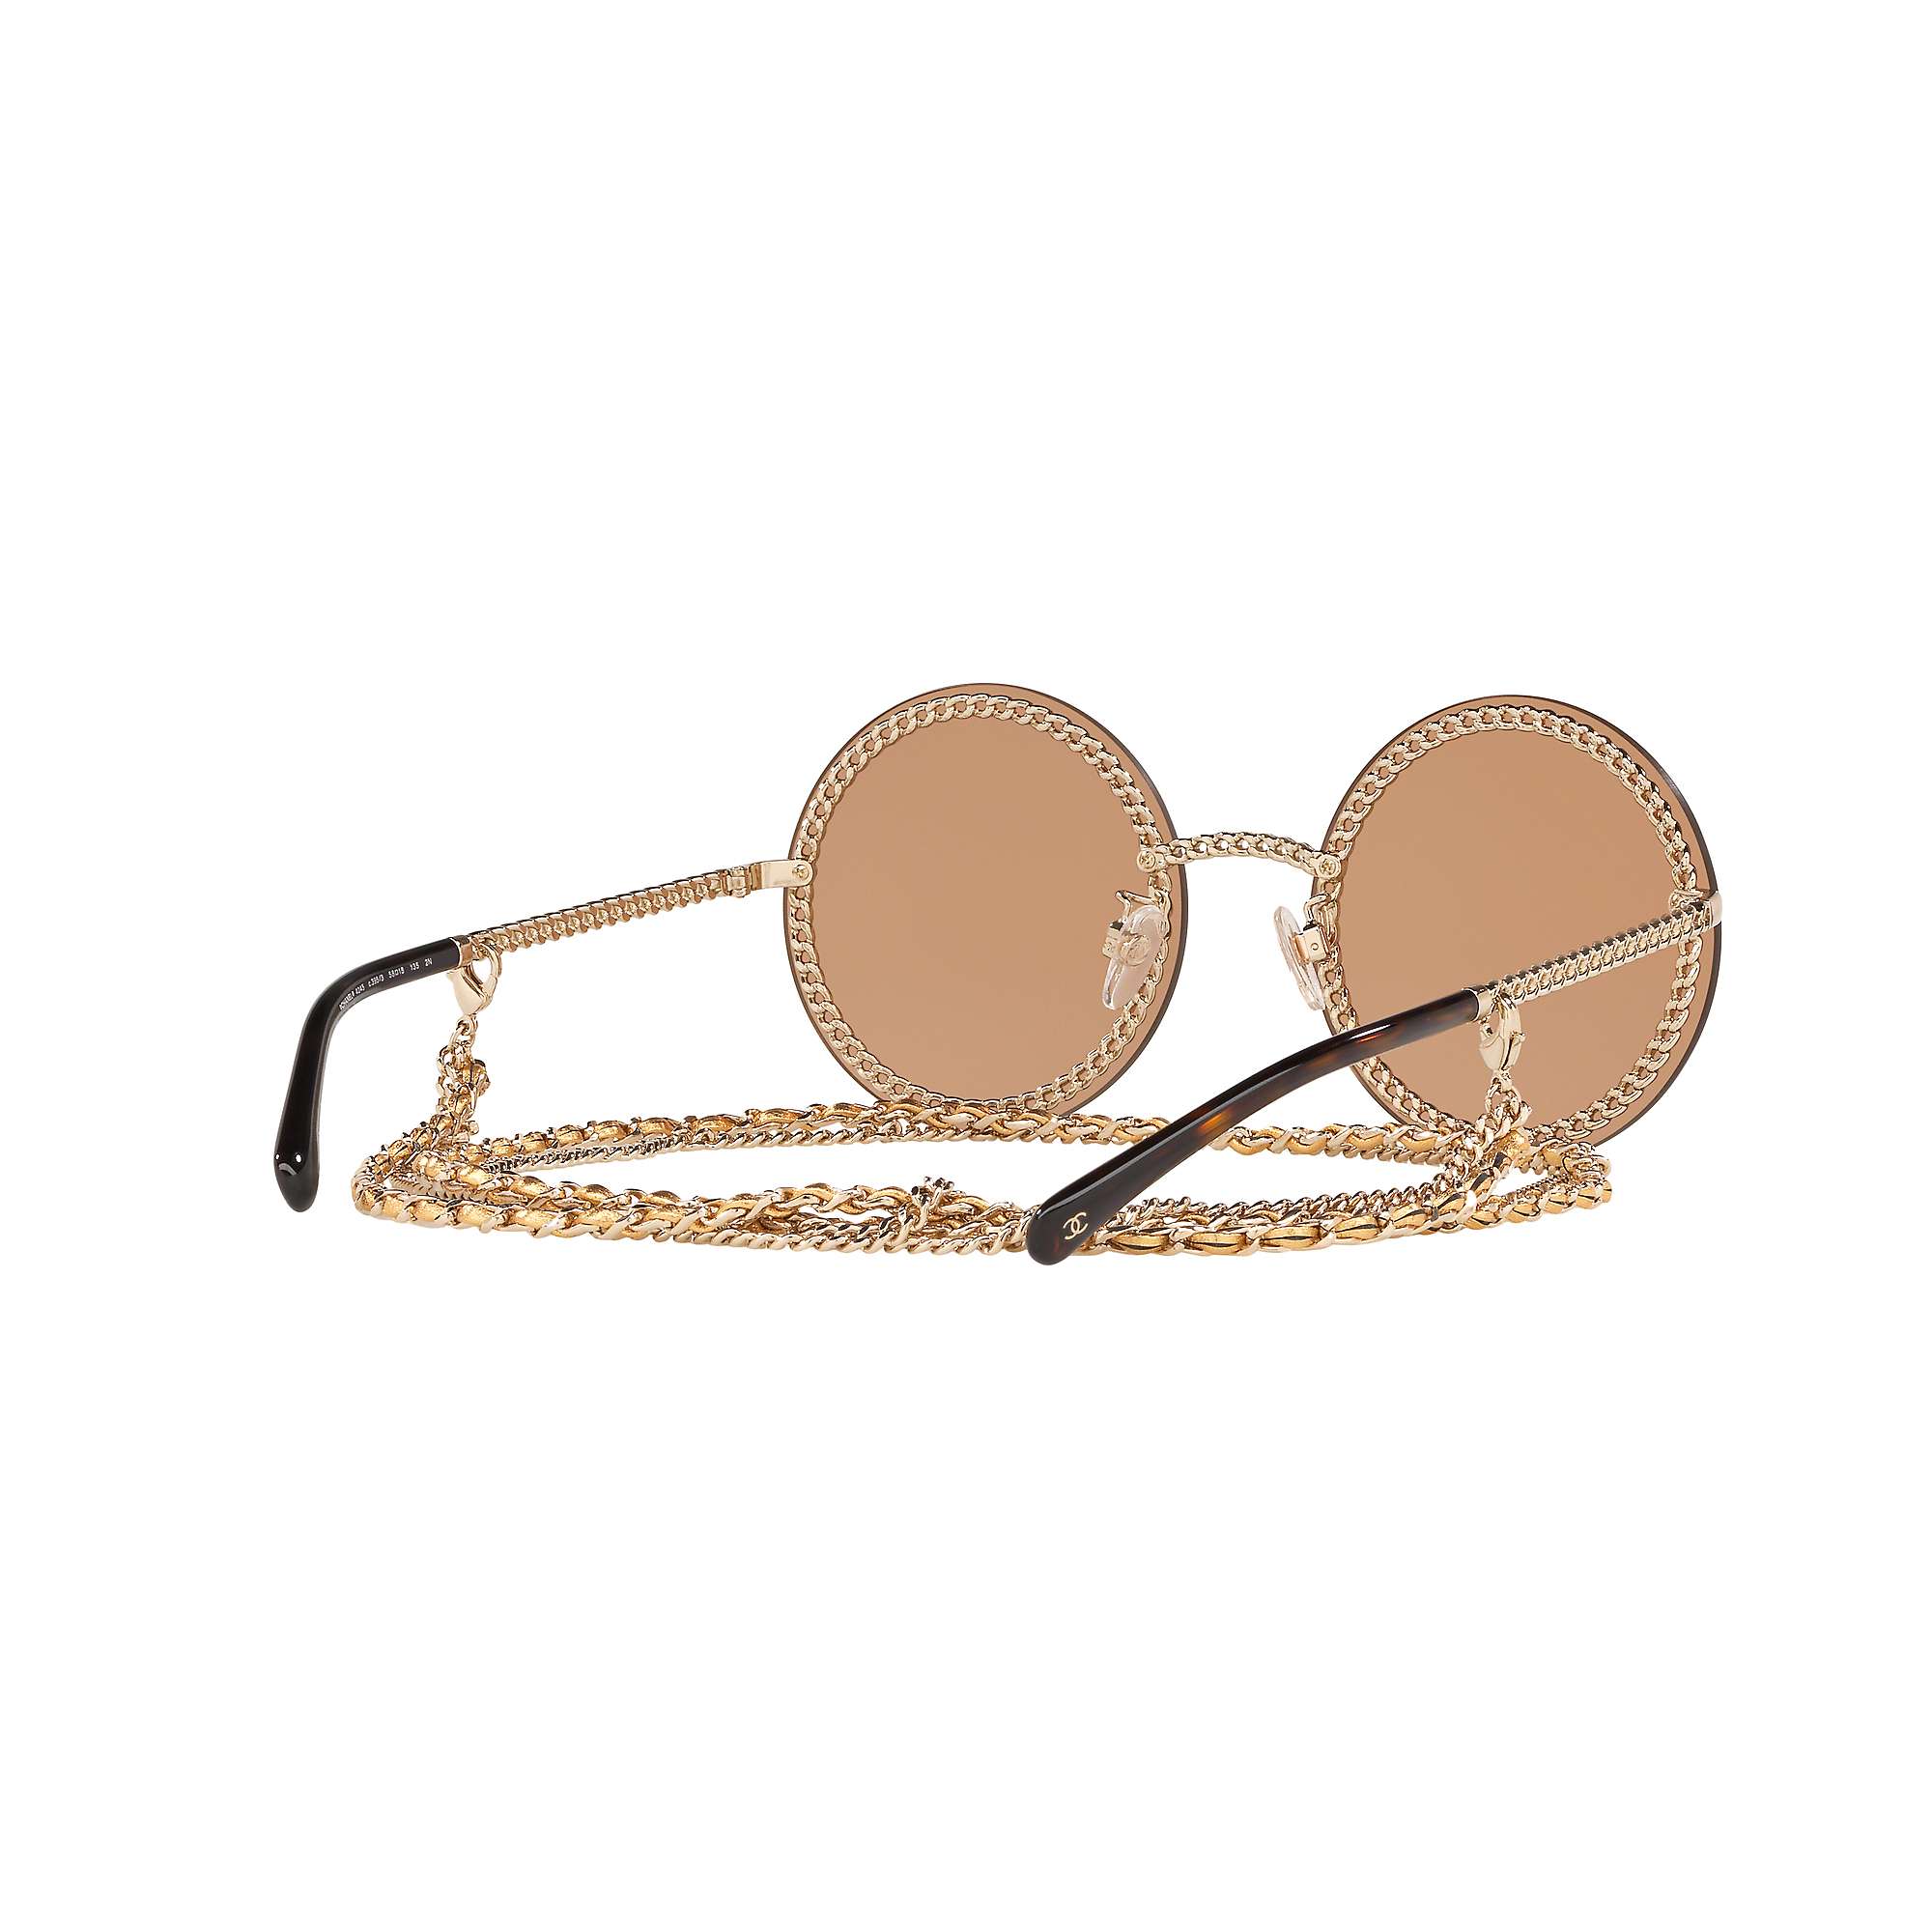 Buy CHANEL Round Sunglasses CH4245 Gold/Blush Online at johnlewis.com